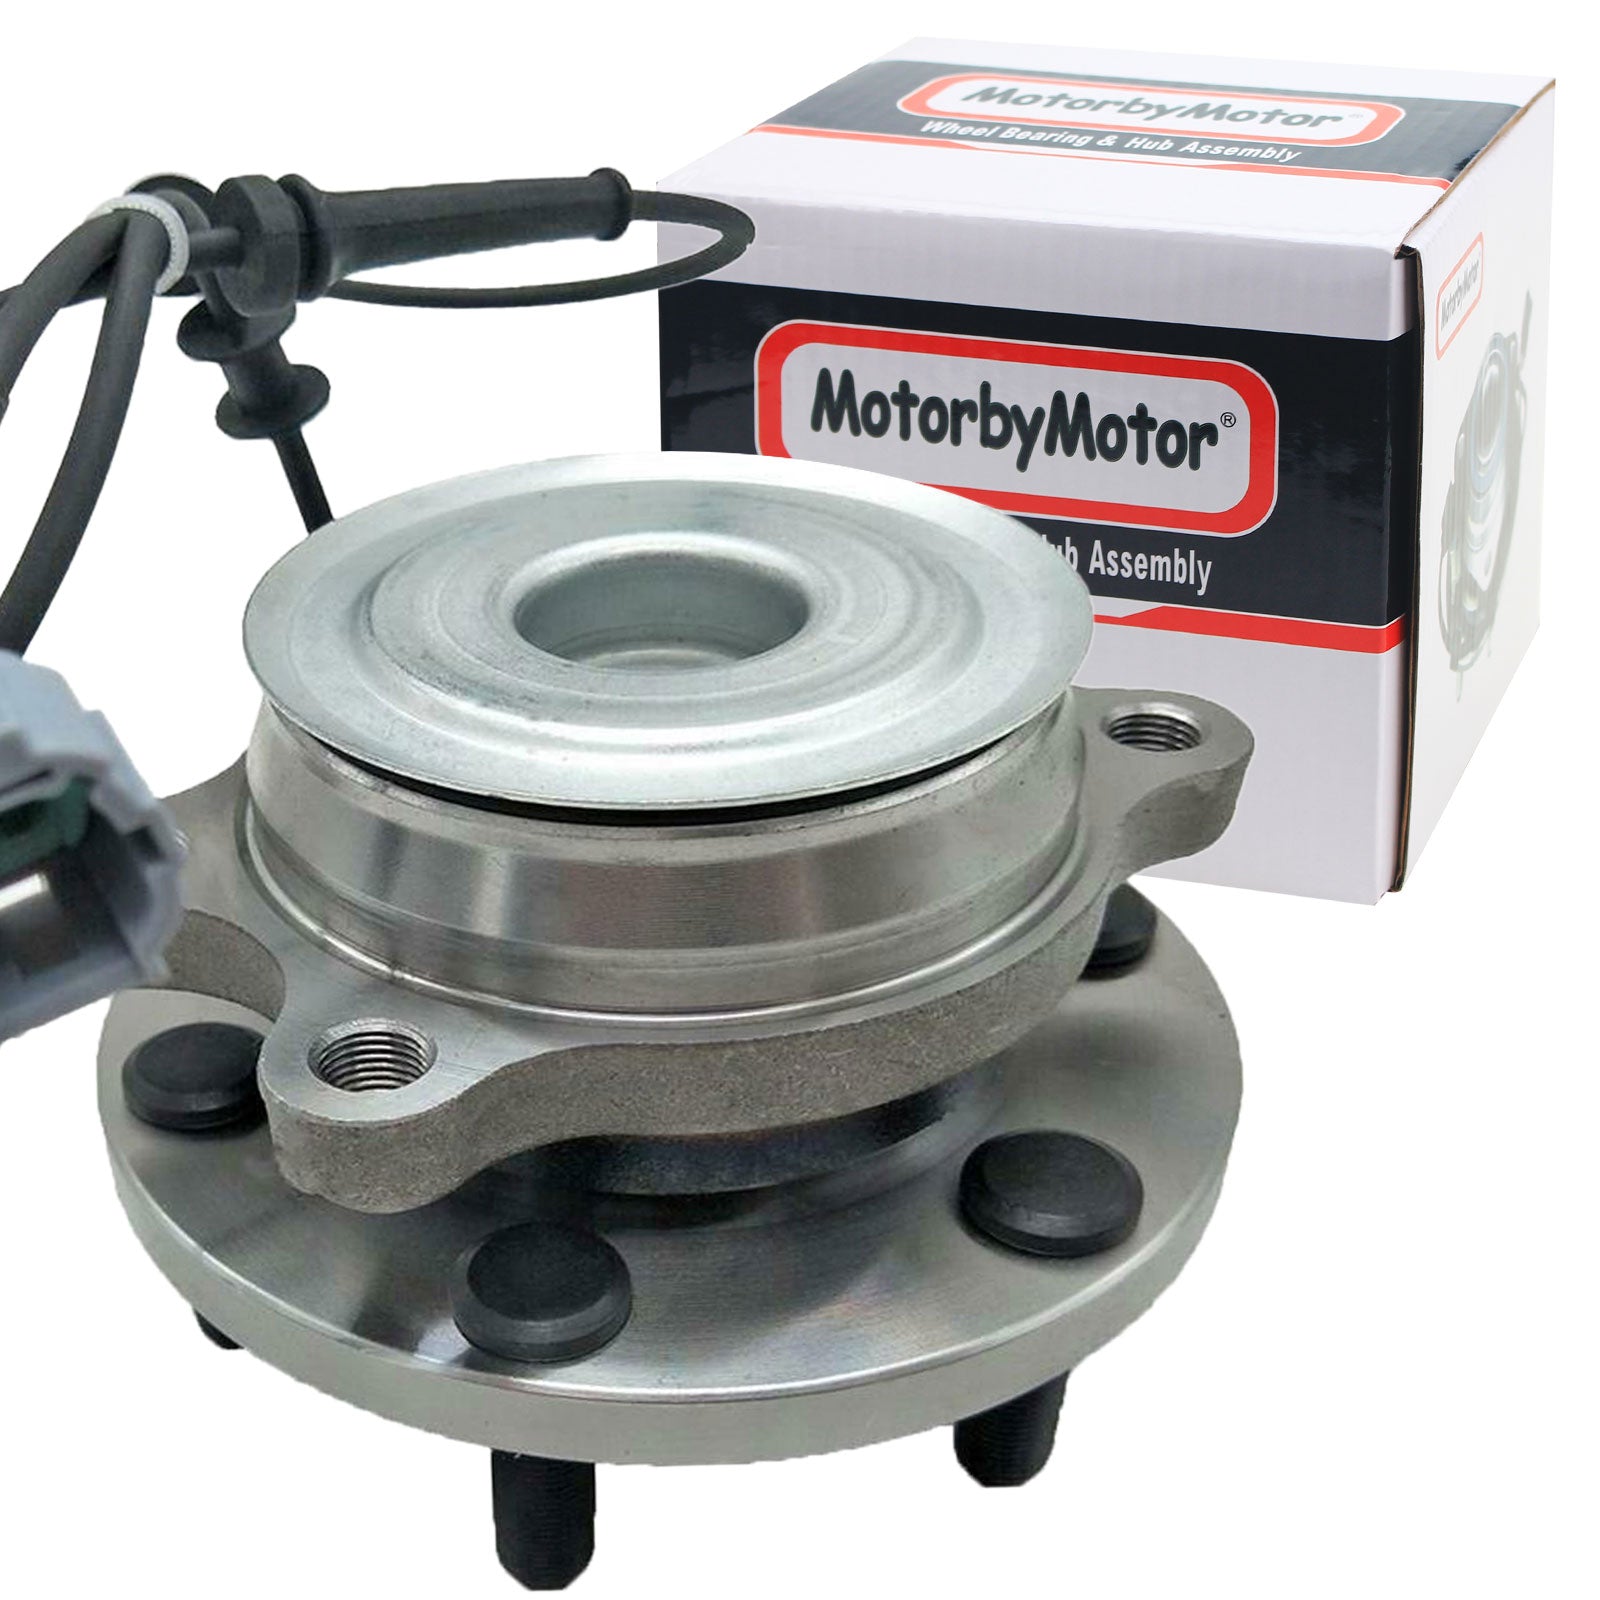 MotorbyMotor 515064 Front Wheel Bearing and Hub Assembly 2WD with 6 Lugs Fit for Nissan Frontier Pathfinder Xterra, Suzuki Equator Low-Runout OE Directly Replacement Hub Bearing (2WD RWD, w/ABS) MotorbyMotor